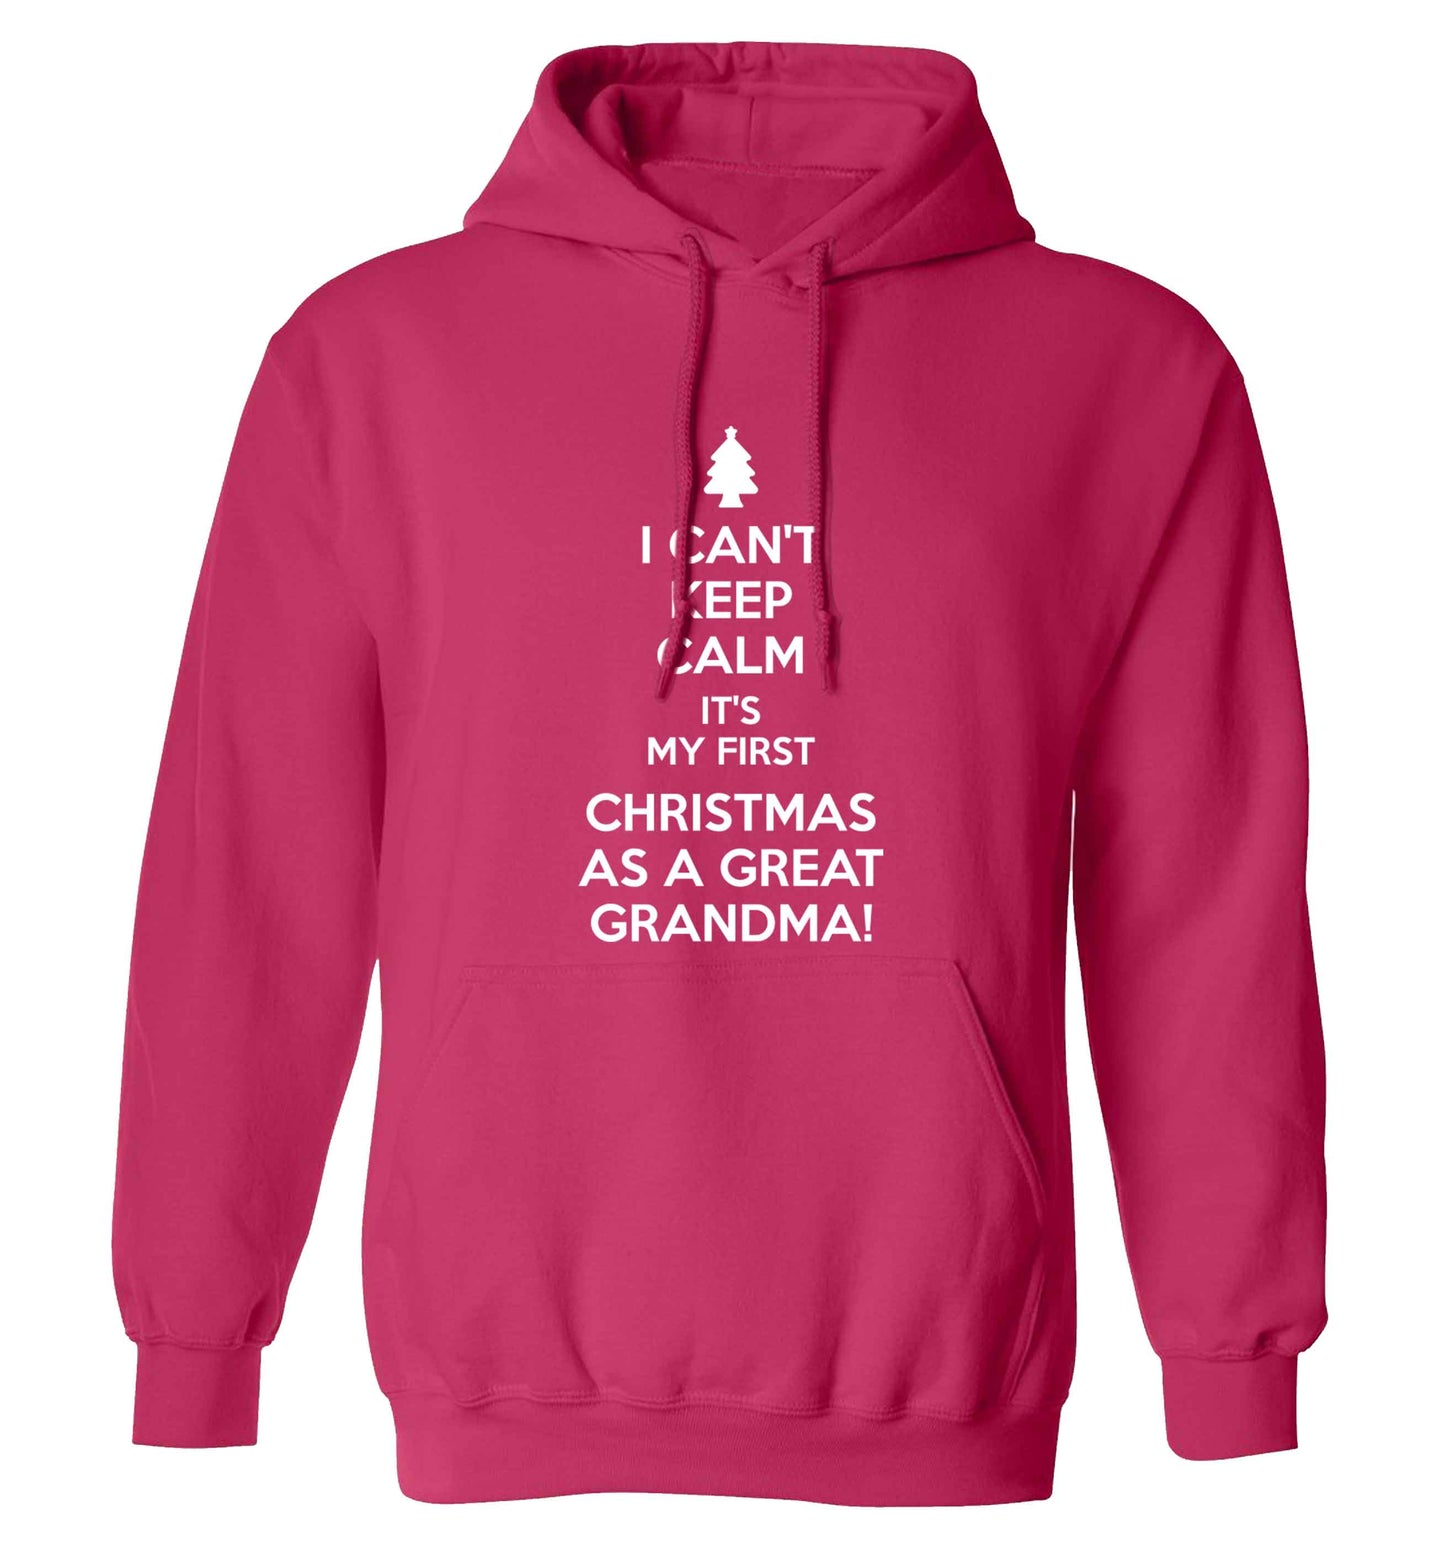 I can't keep calm it's my first Christmas as a great grandma! adults unisex pink hoodie 2XL